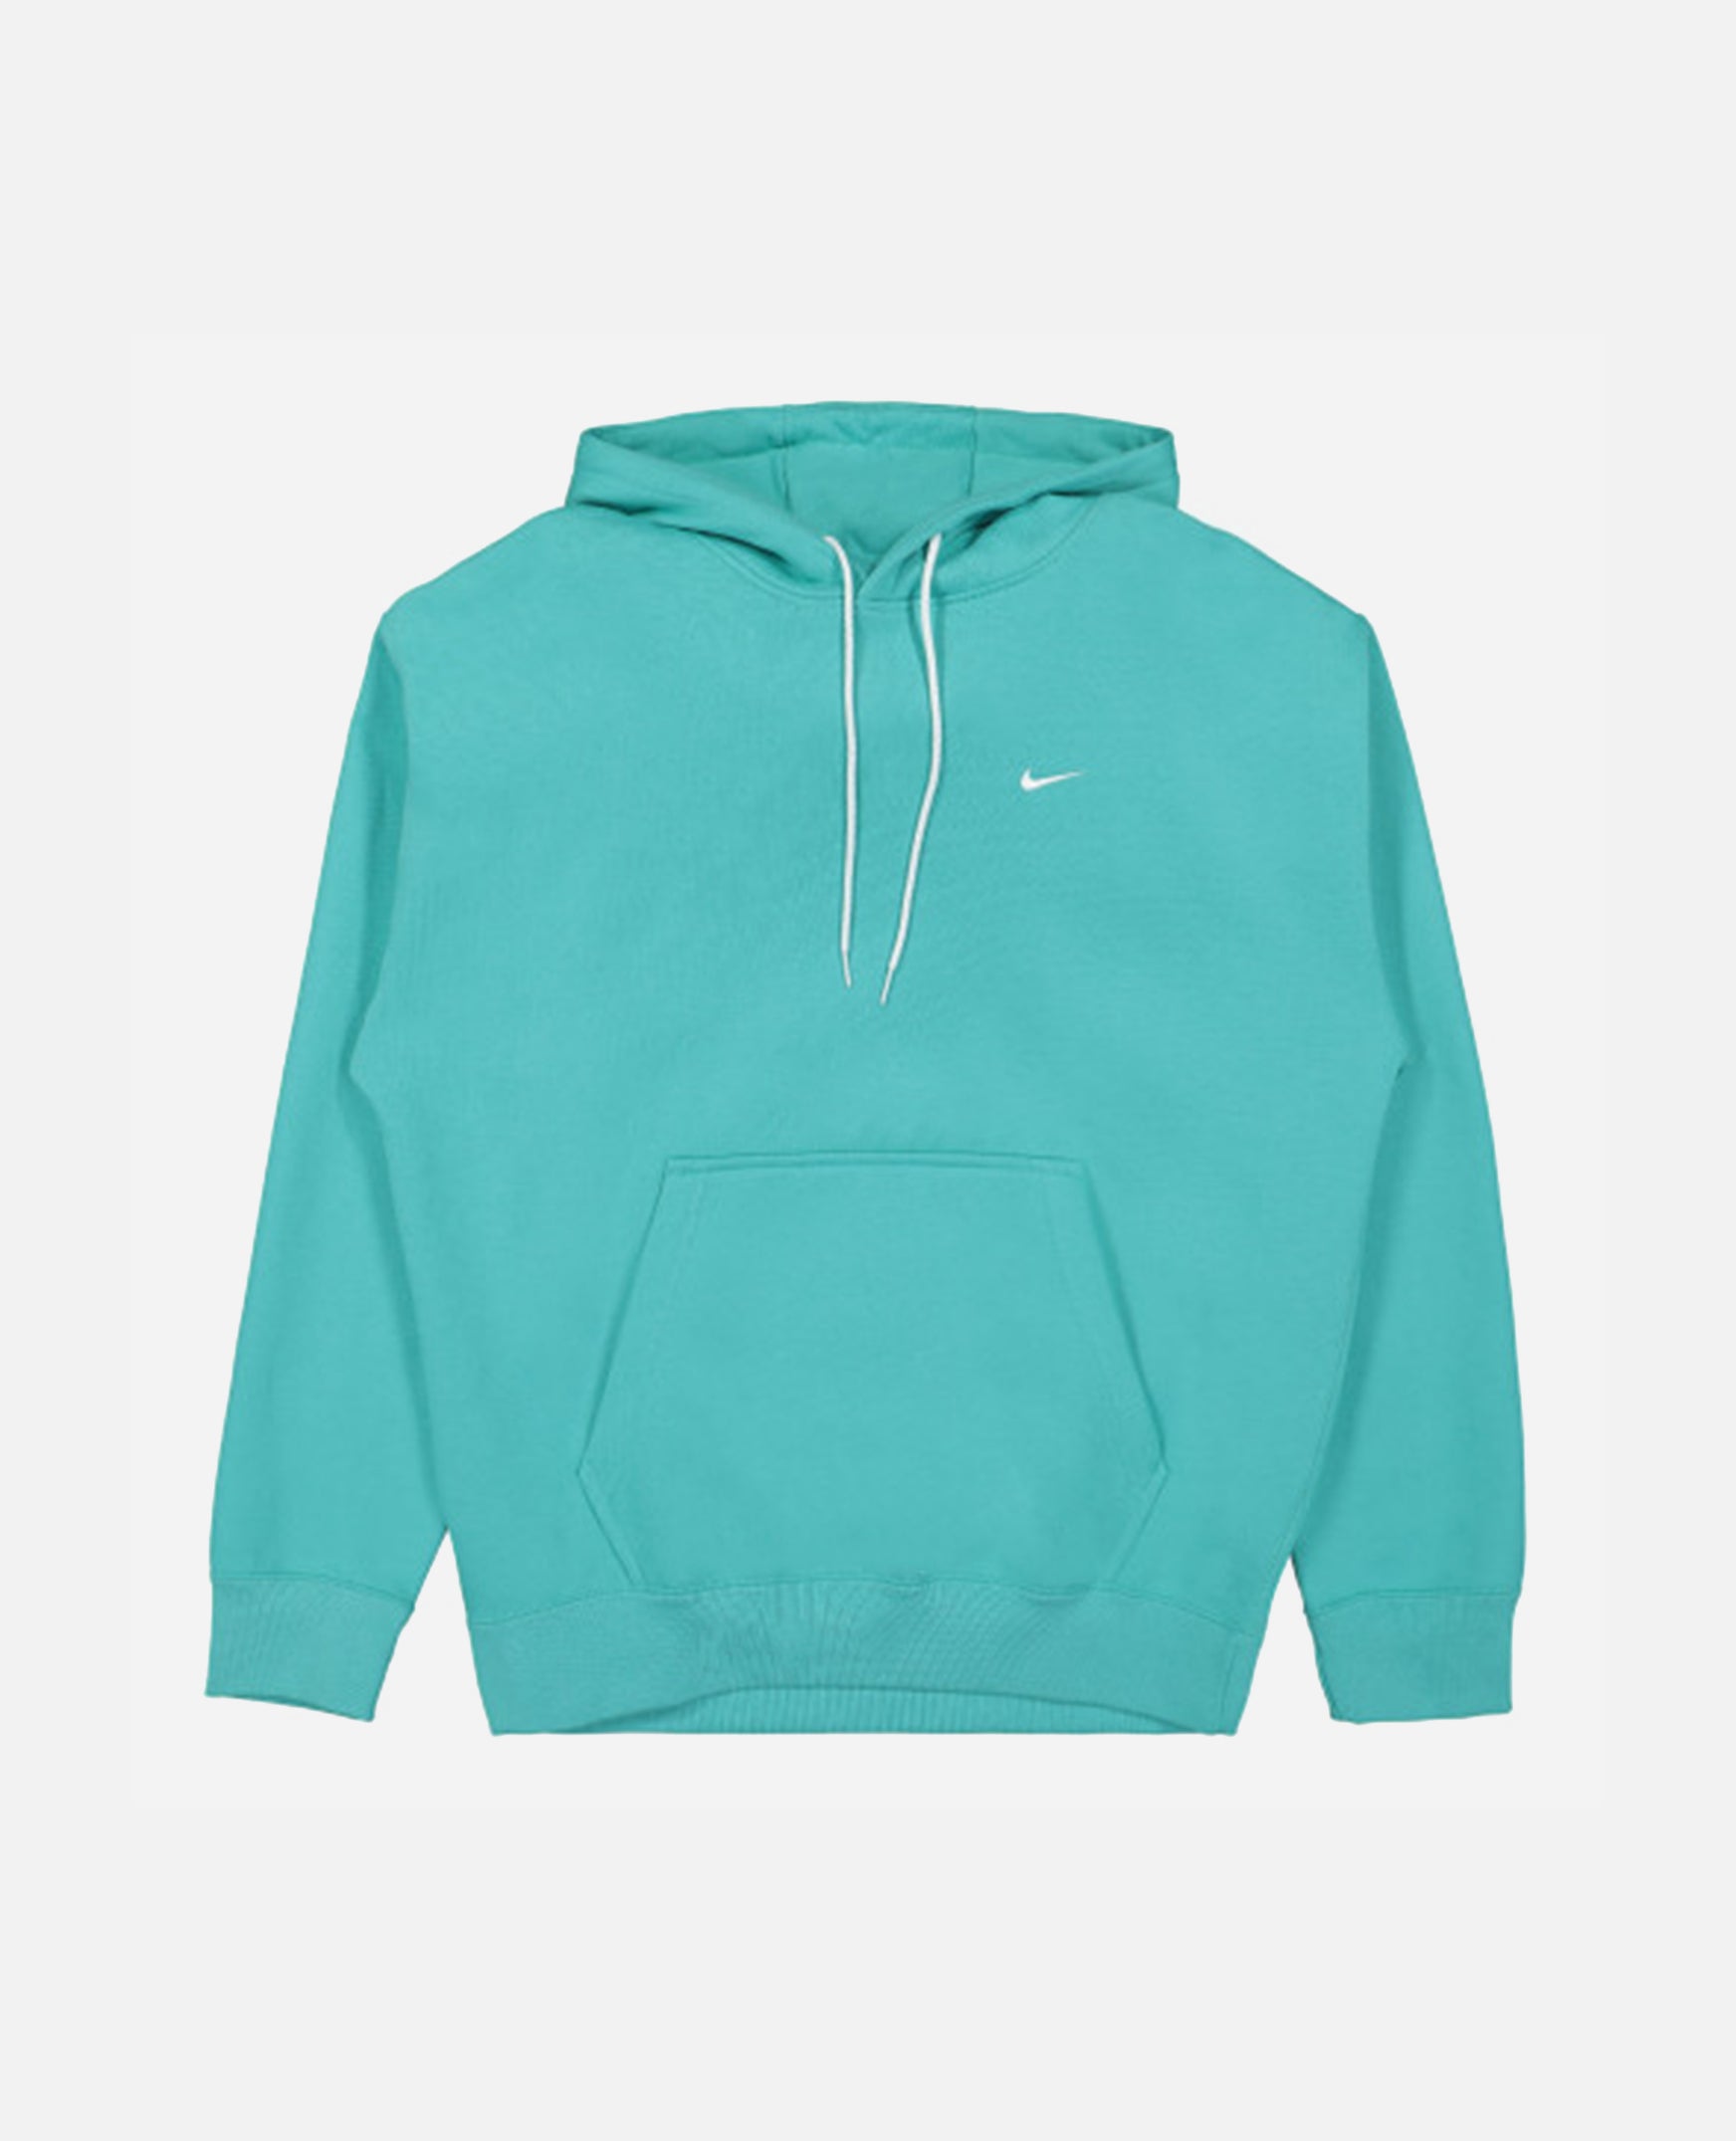 NikeLab Solo Swoosh Fleece Hooded Sweater (Washed Teal/White)